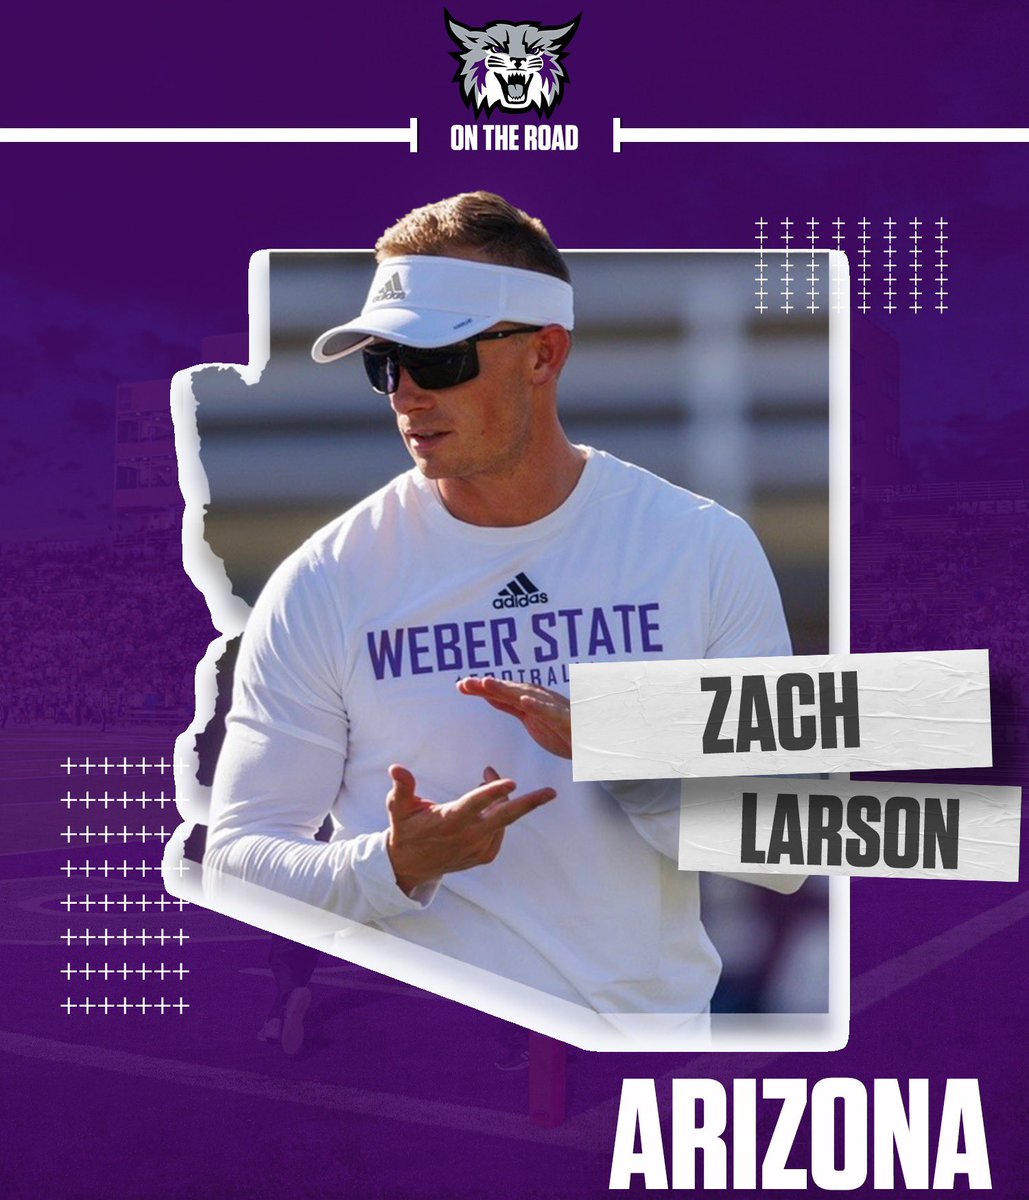 Excited to be in the state of Arizona all week looking for some future wildcats! #PurpleReign ☔️